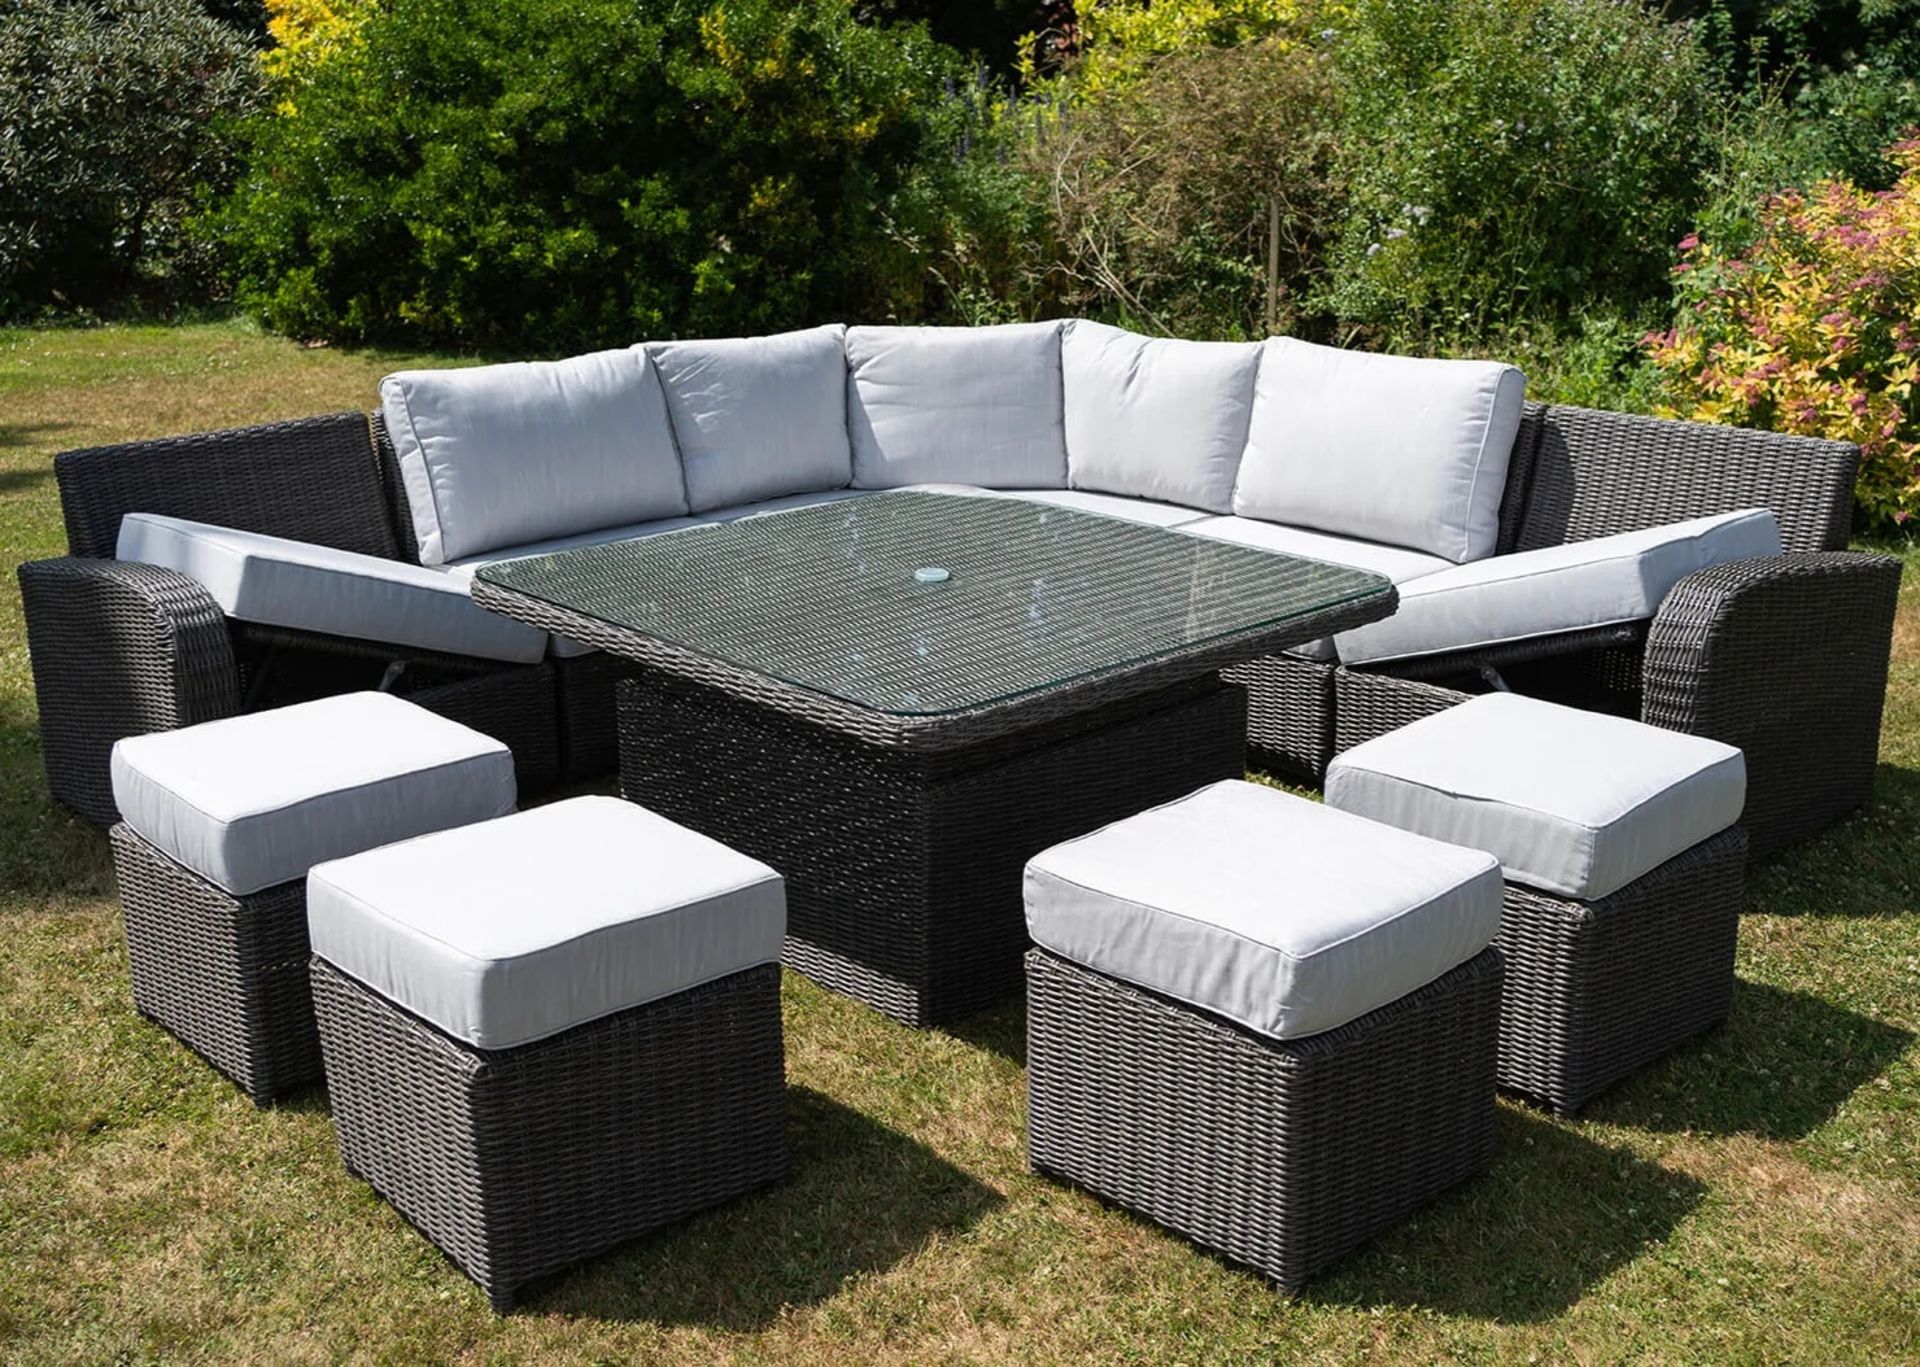 Brand New Moda Furniture, 10 Seater Outdoor Rise and Fall Table Dining Set in Natural with Cream - Image 2 of 9